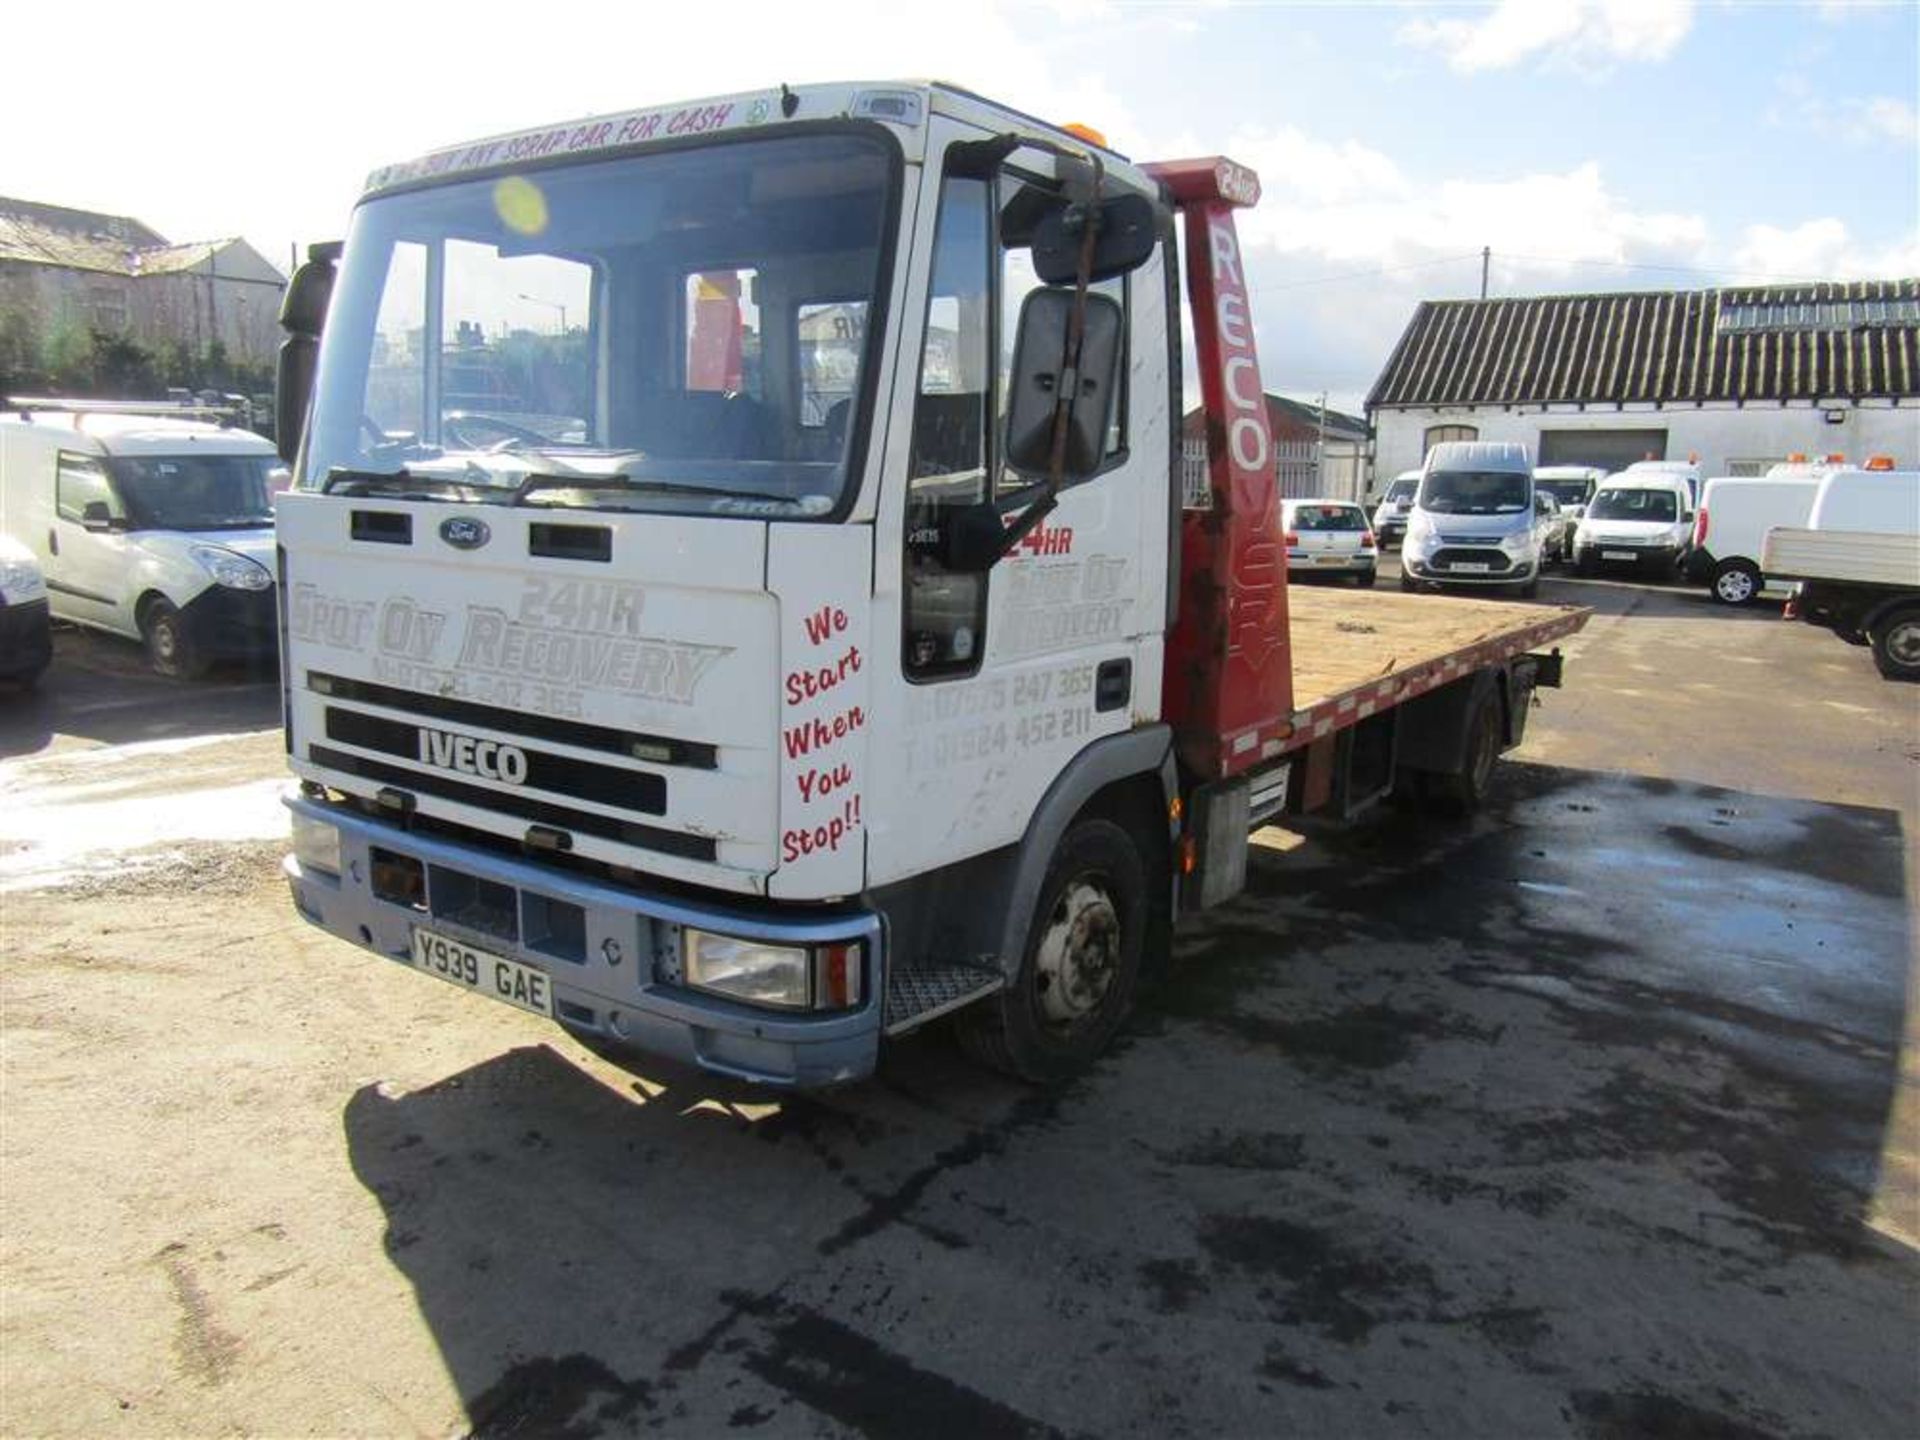 2001 Y reg Iveco Euro Cargo 7.5t Tilt / Slide Recovery Truck - Image 2 of 6